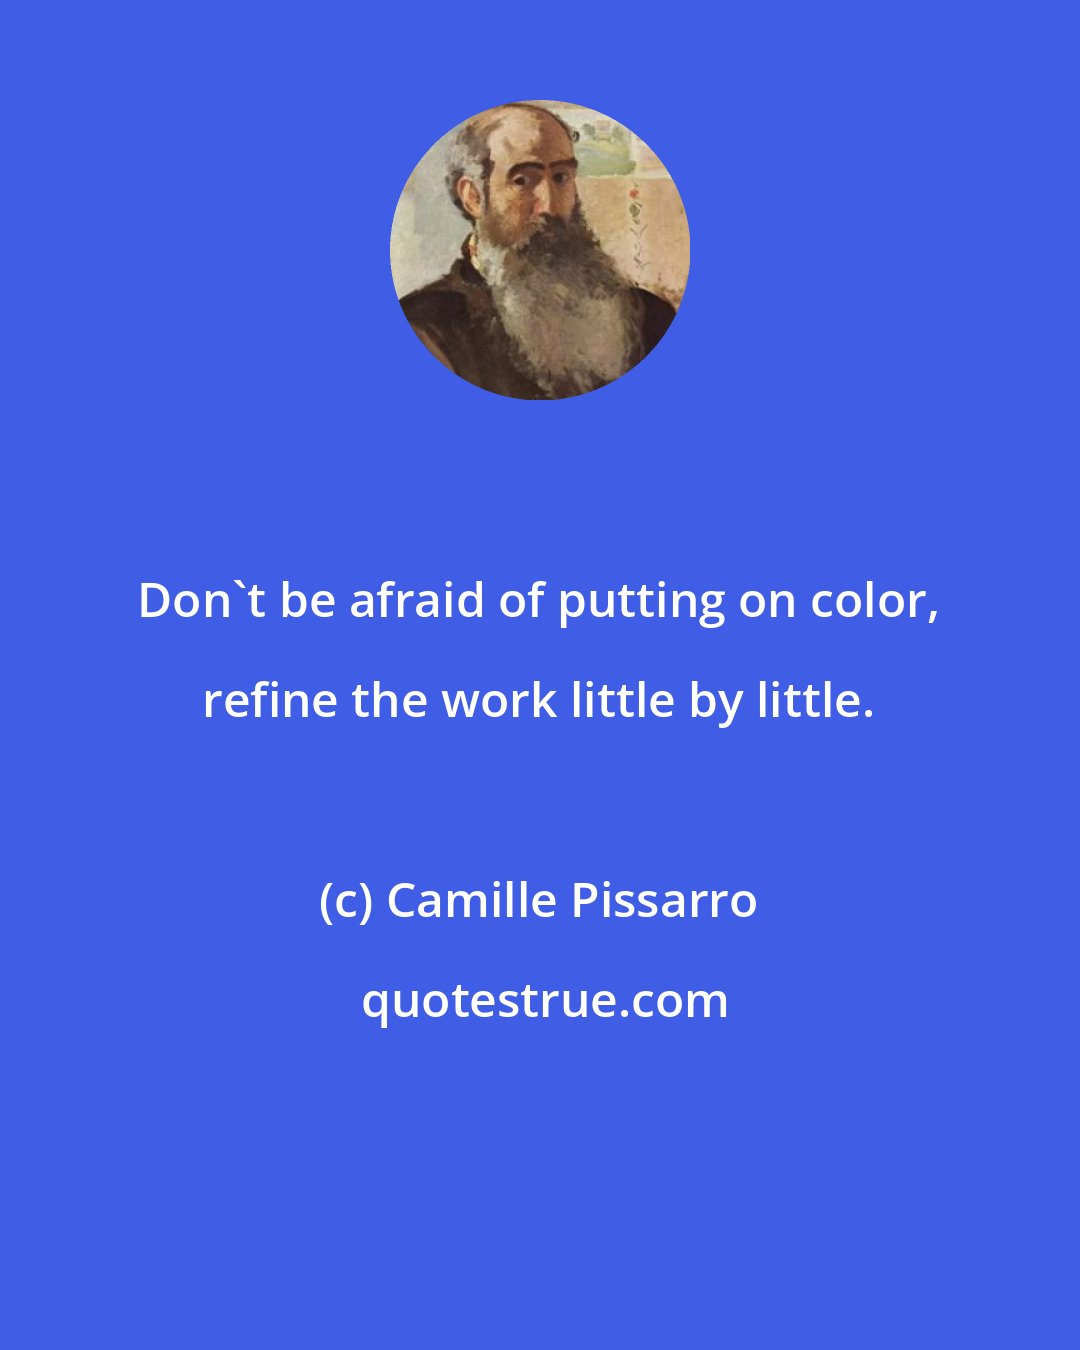 Camille Pissarro: Don't be afraid of putting on color, refine the work little by little.